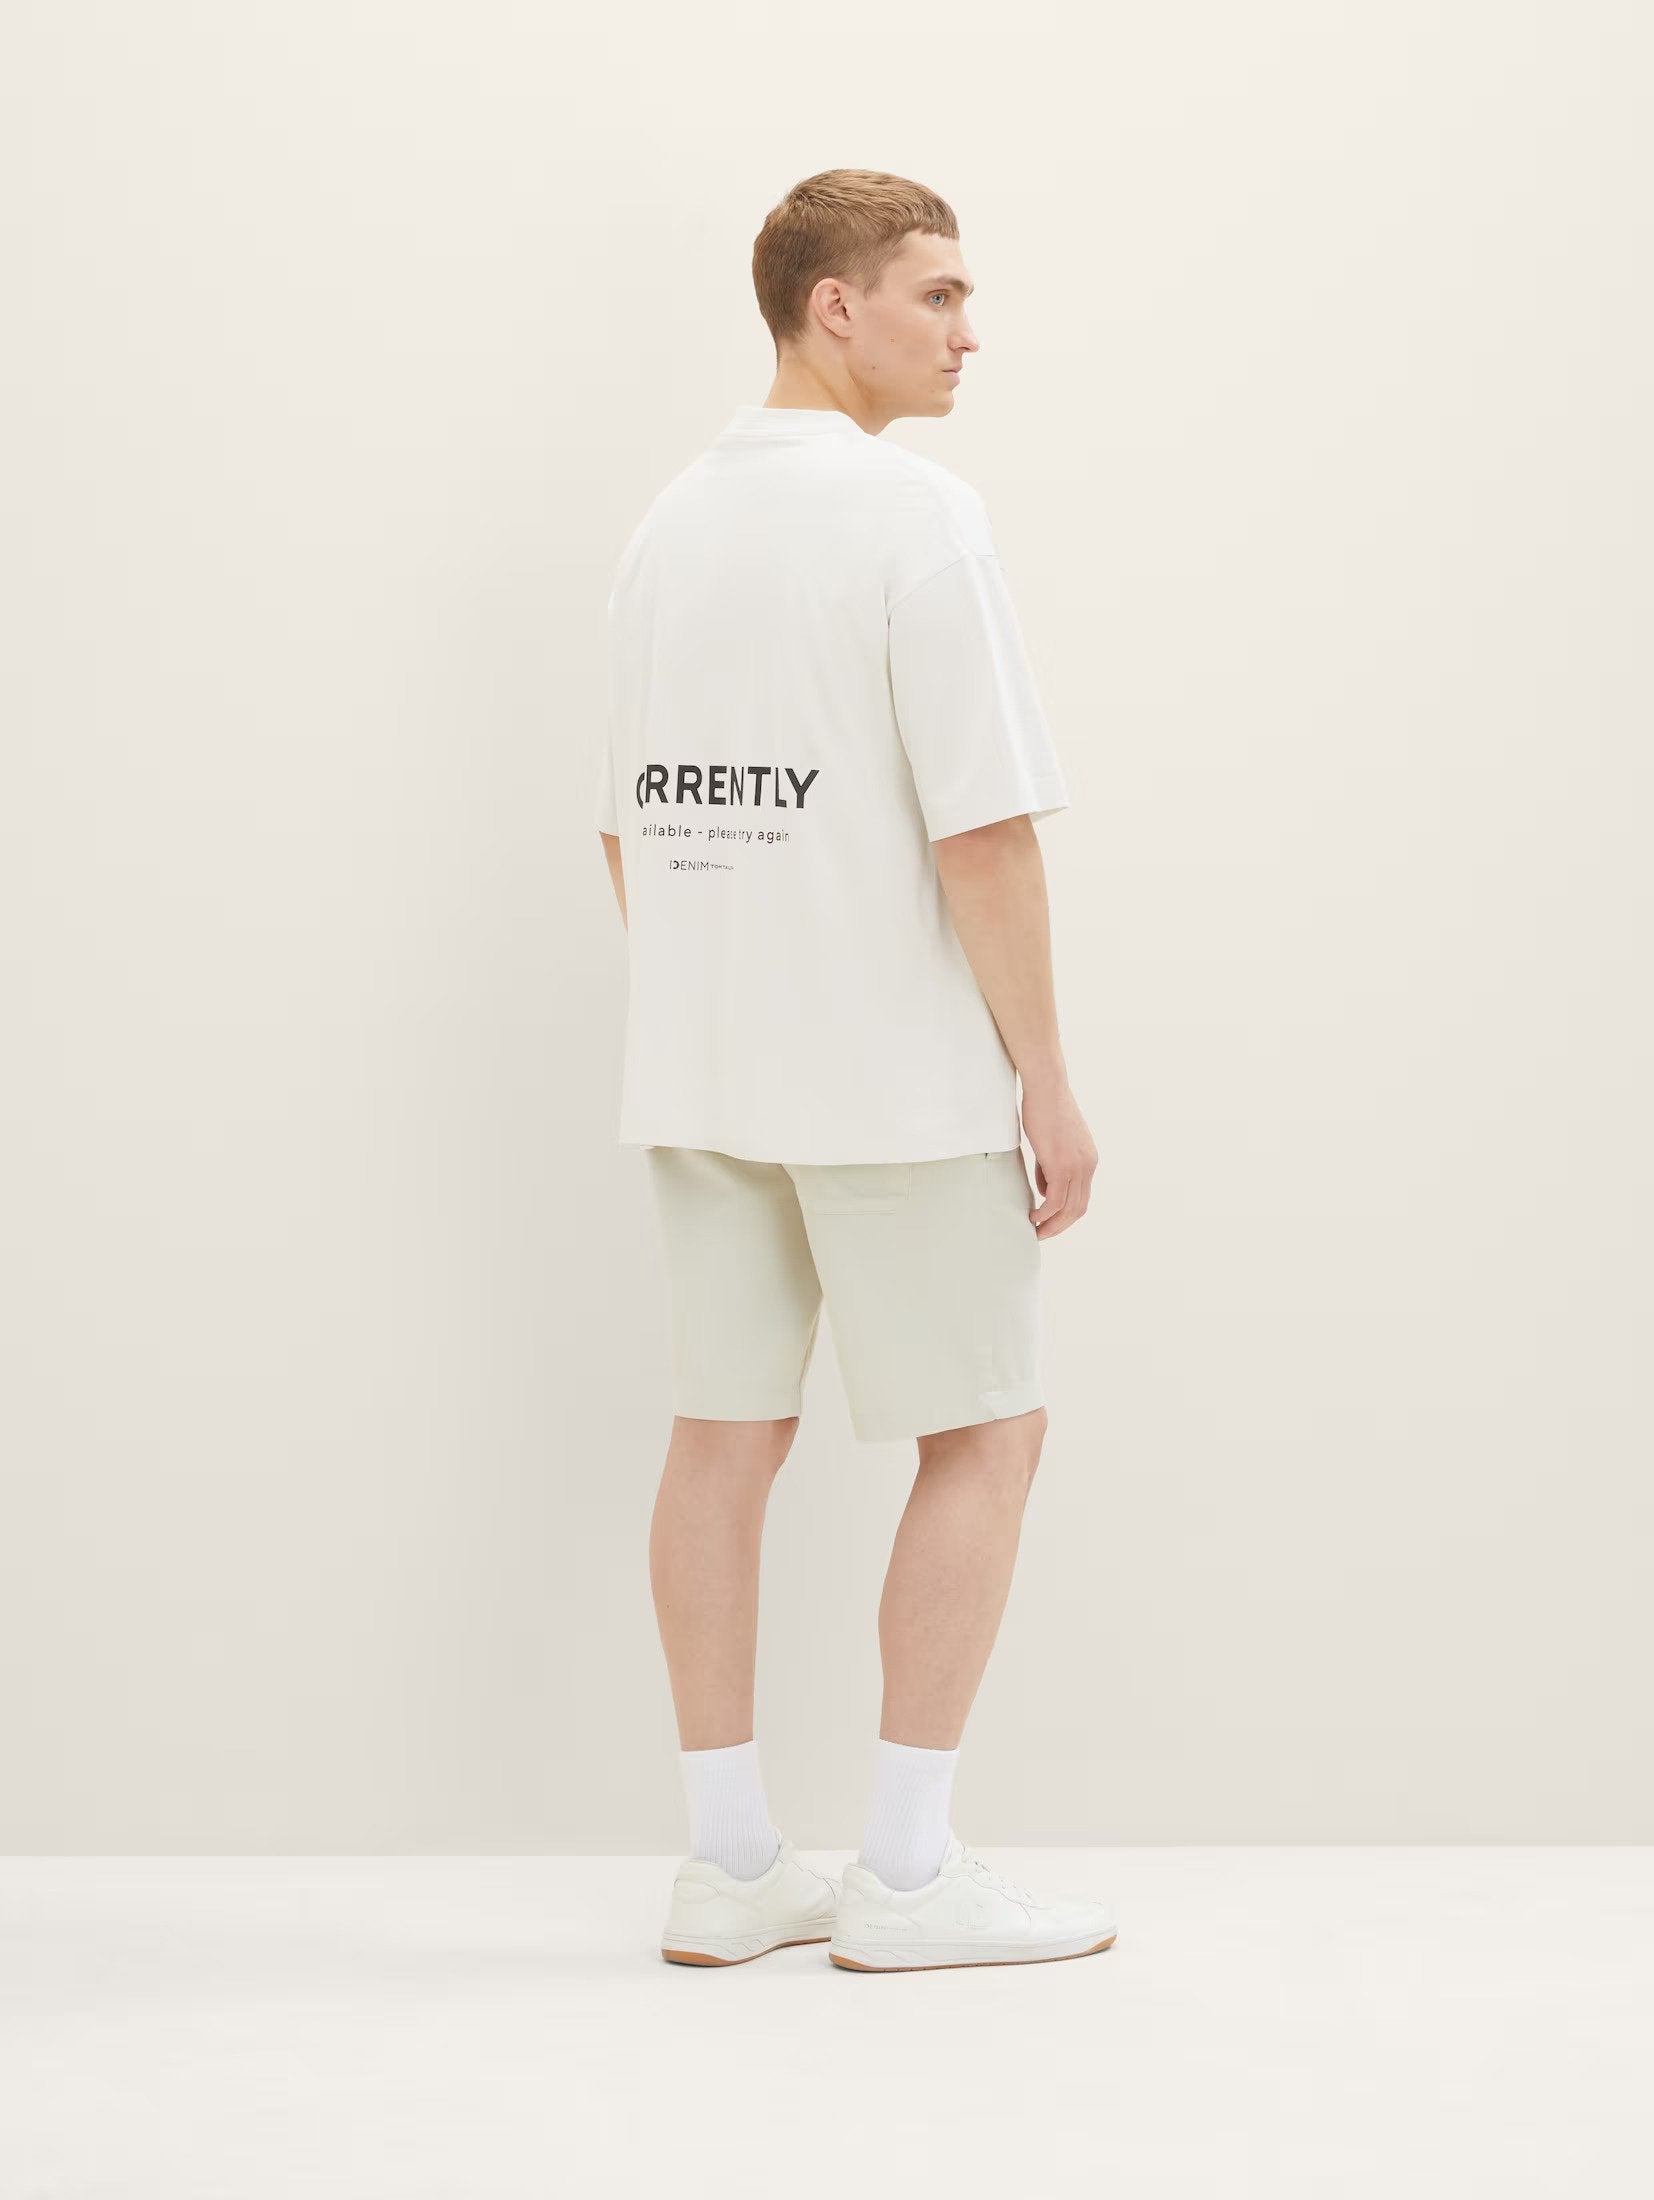 Tom Tailor White Oversized T-Shirt with a Print